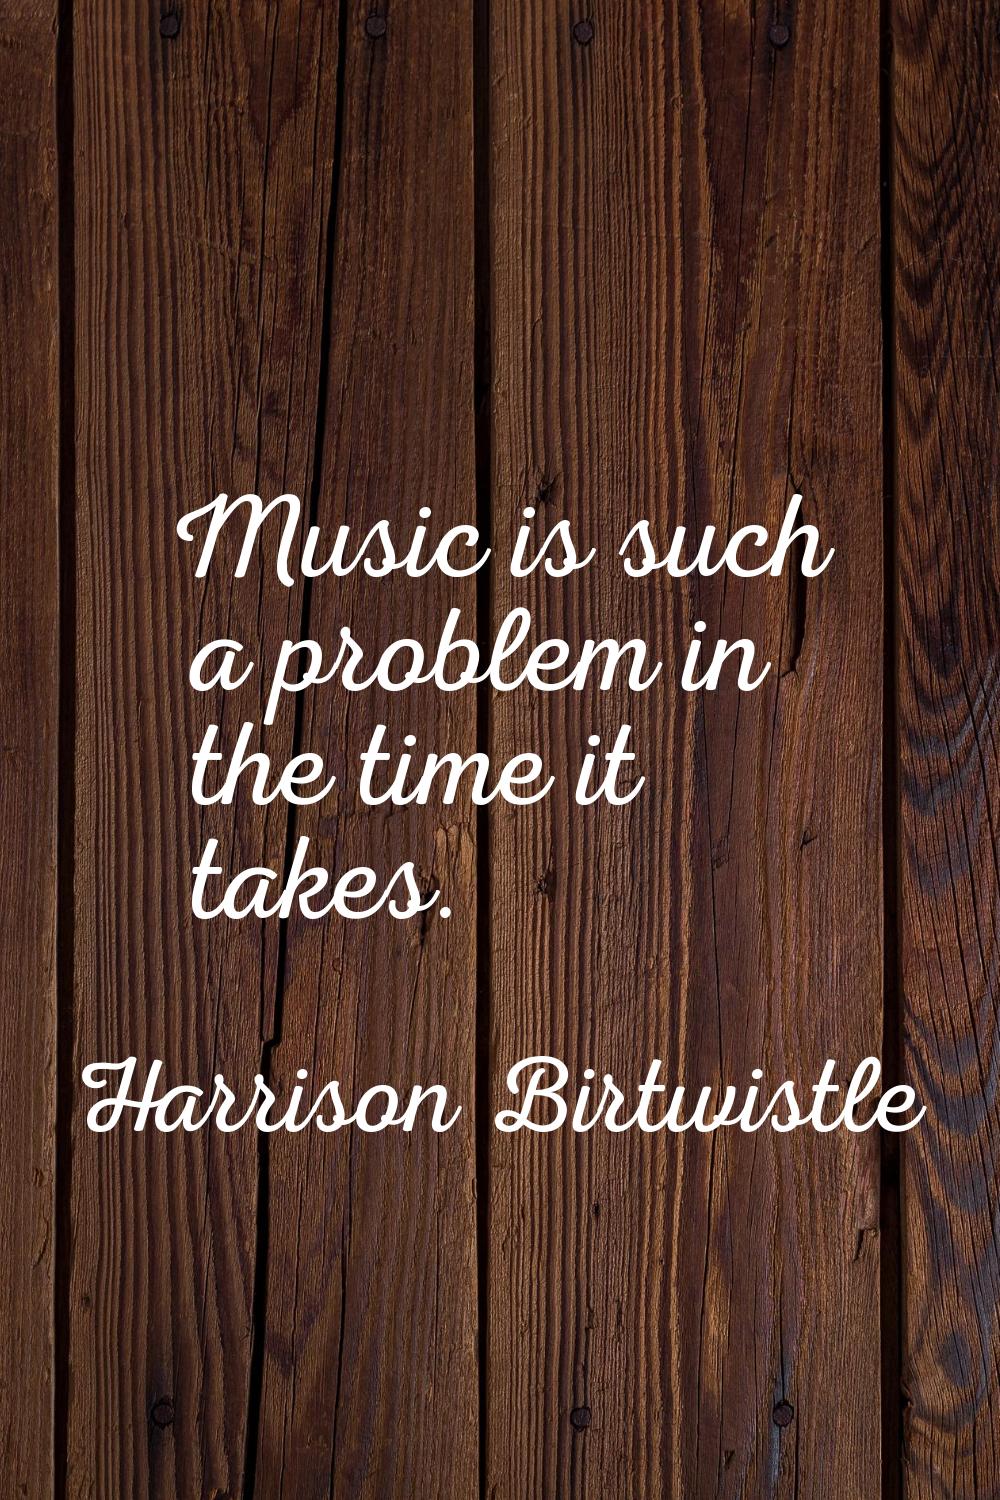 Music is such a problem in the time it takes.